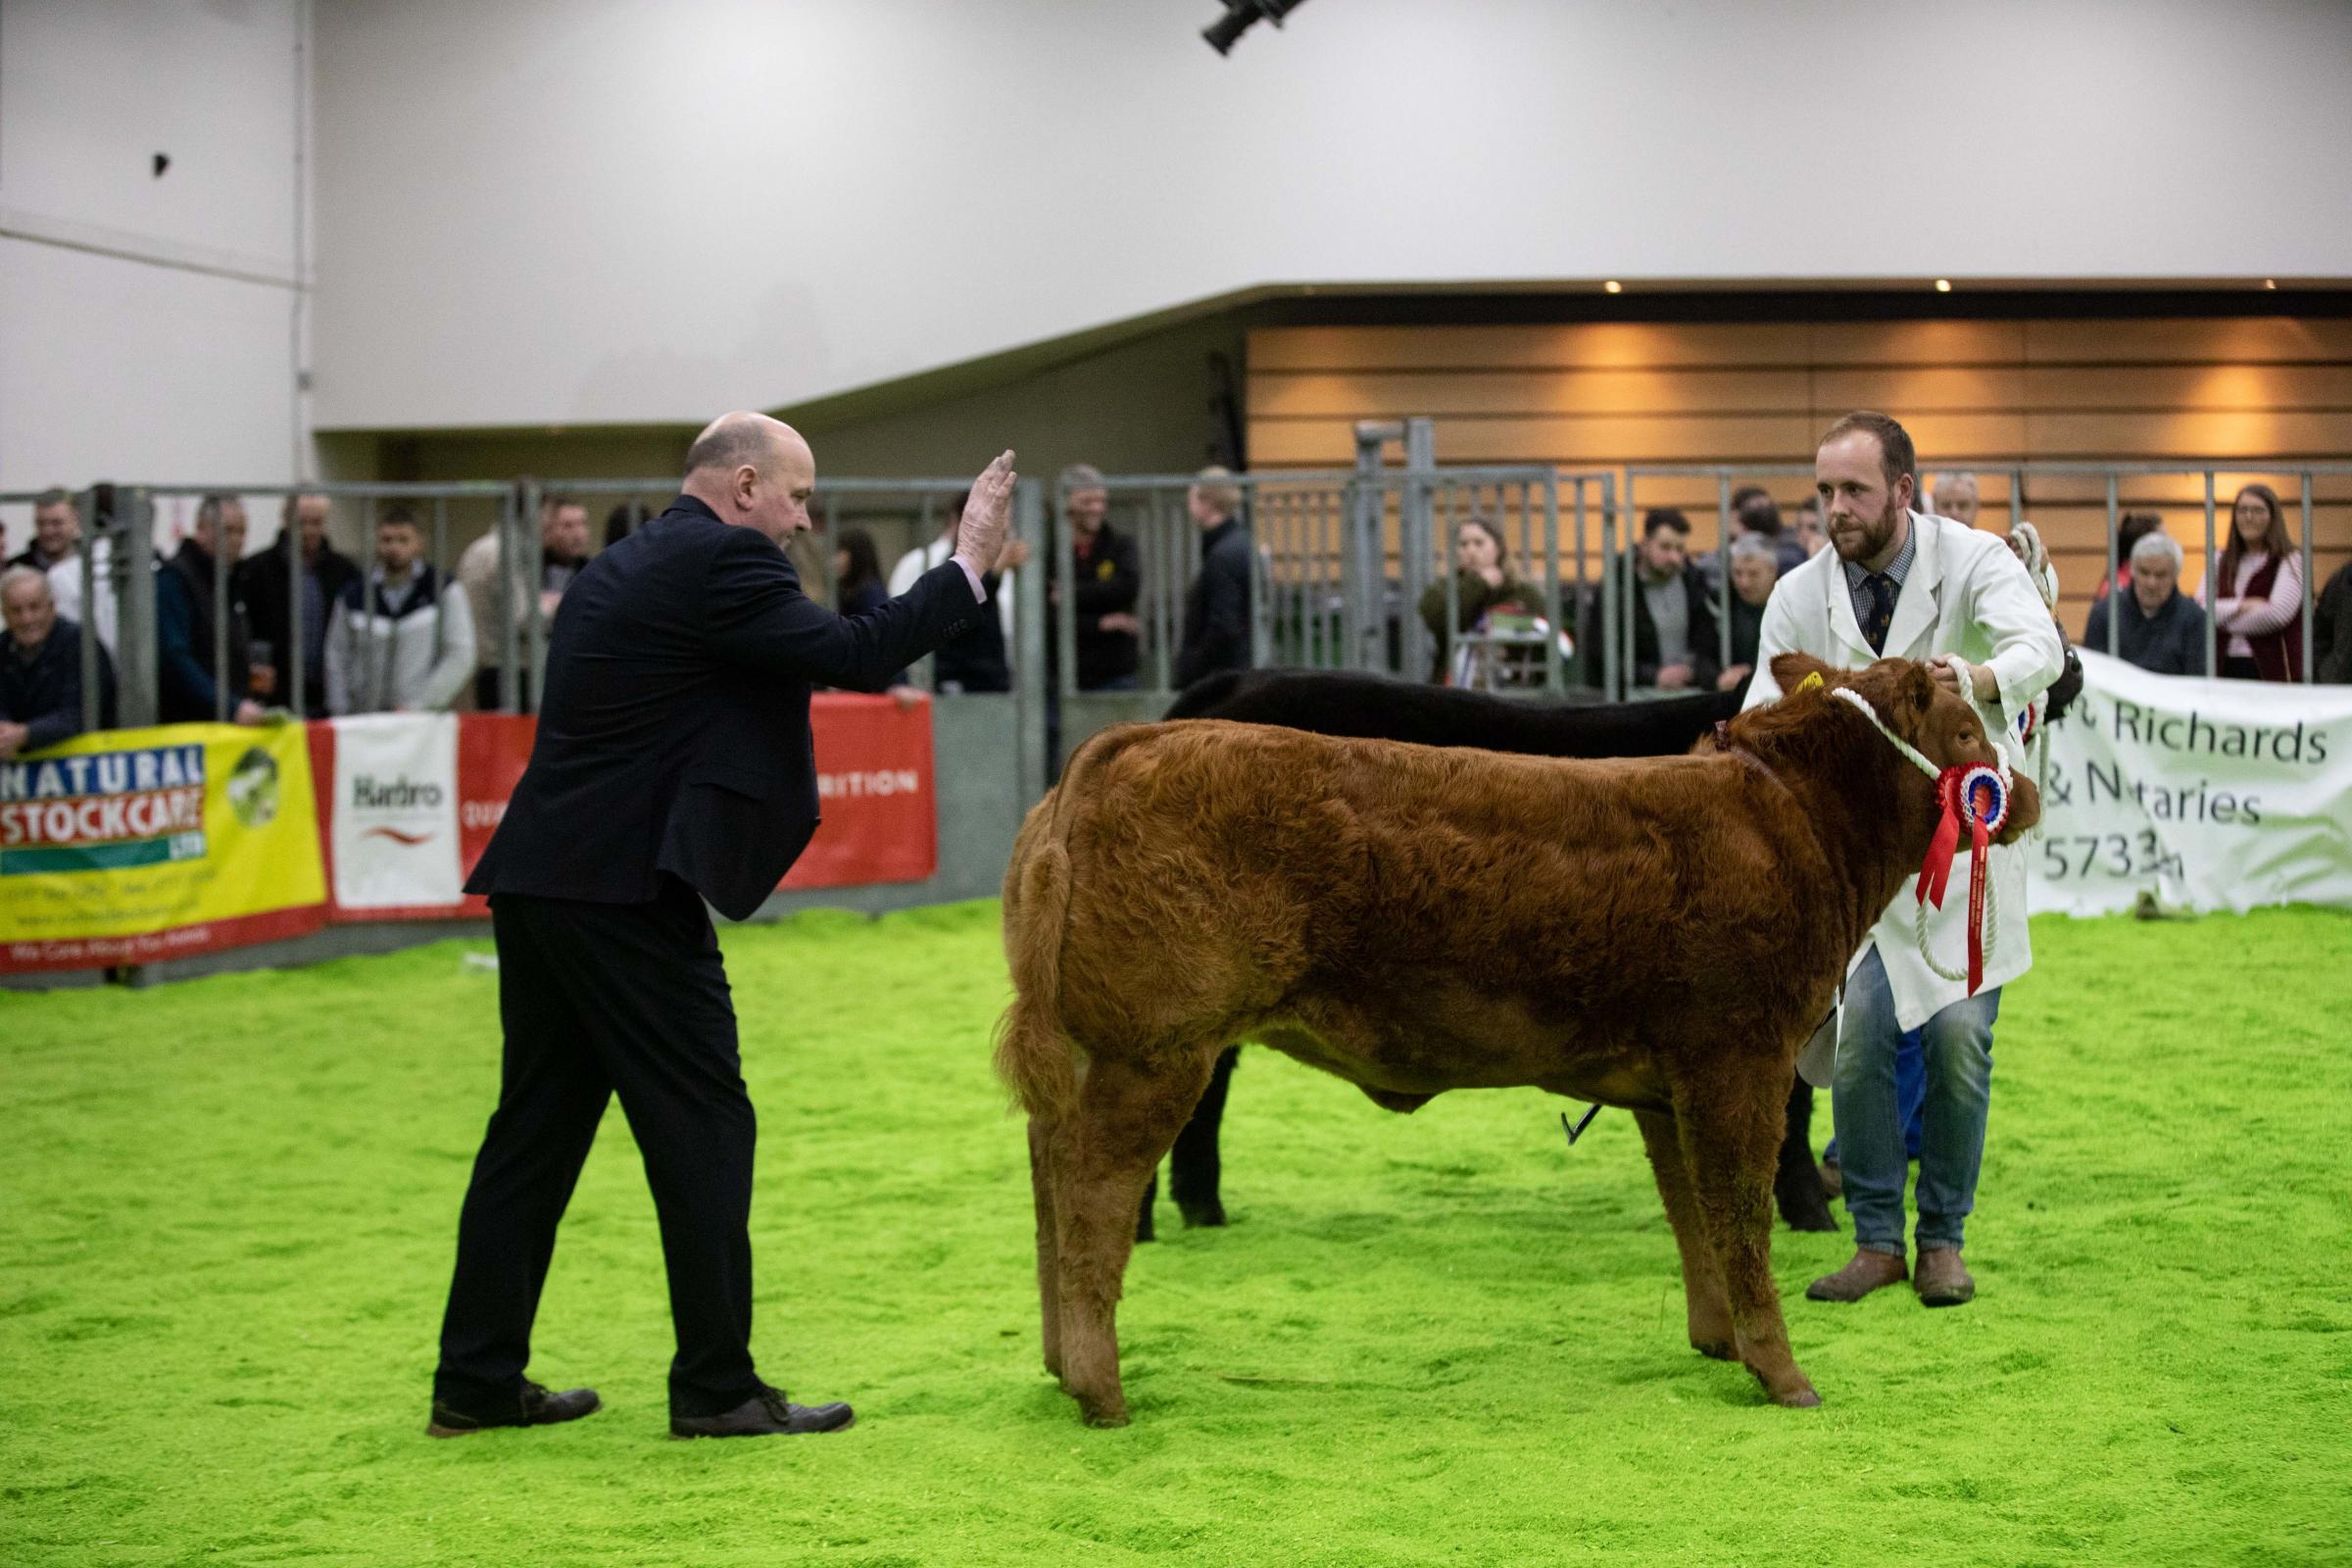 Michael Durno tapping out his champion at the Rising Stars Calf Show in 2019 Ref:EC2511192456